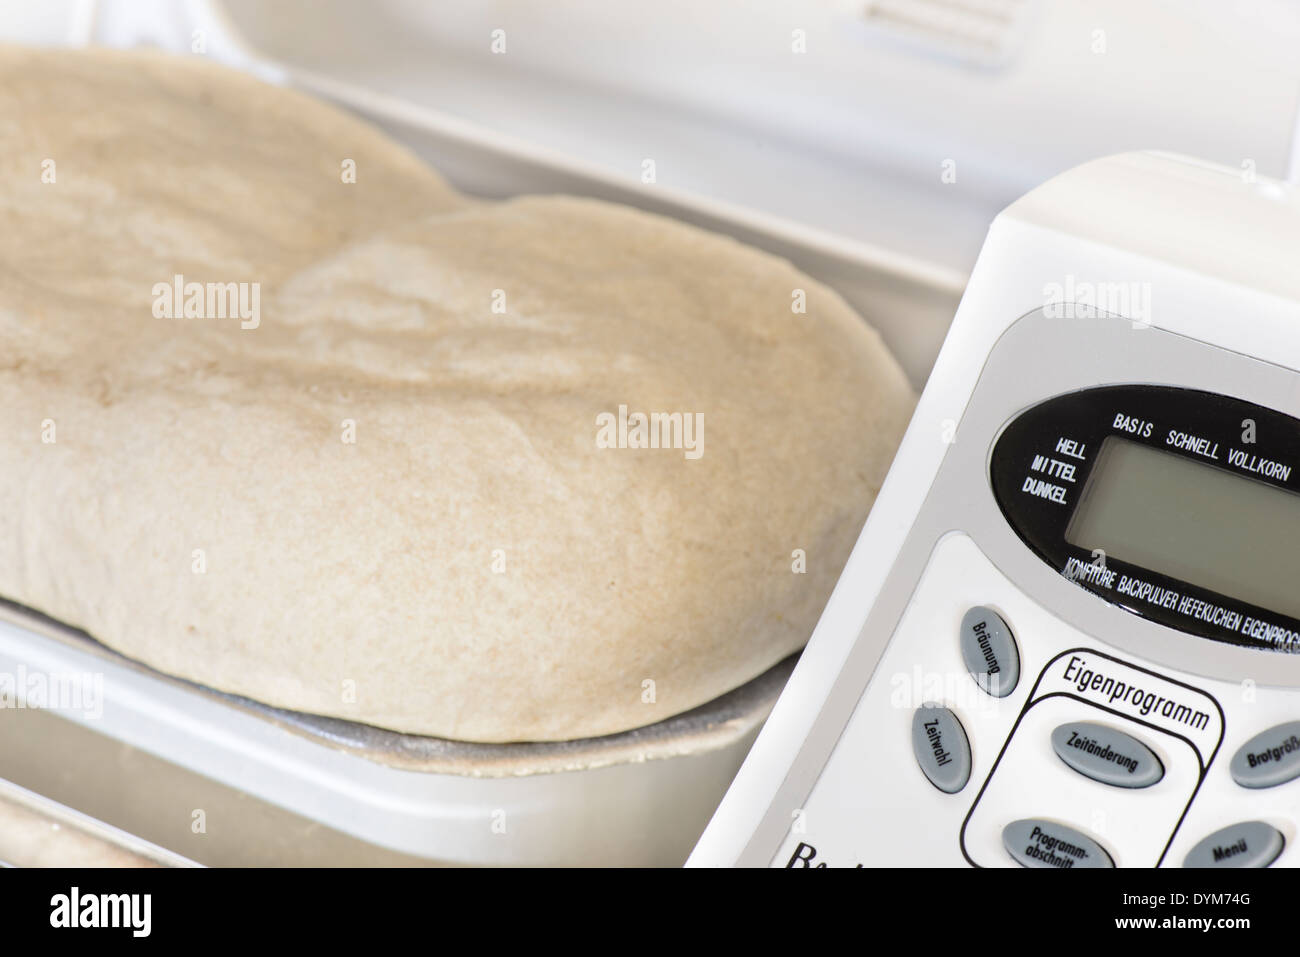 Bread making machine with rising dough Stock Photo